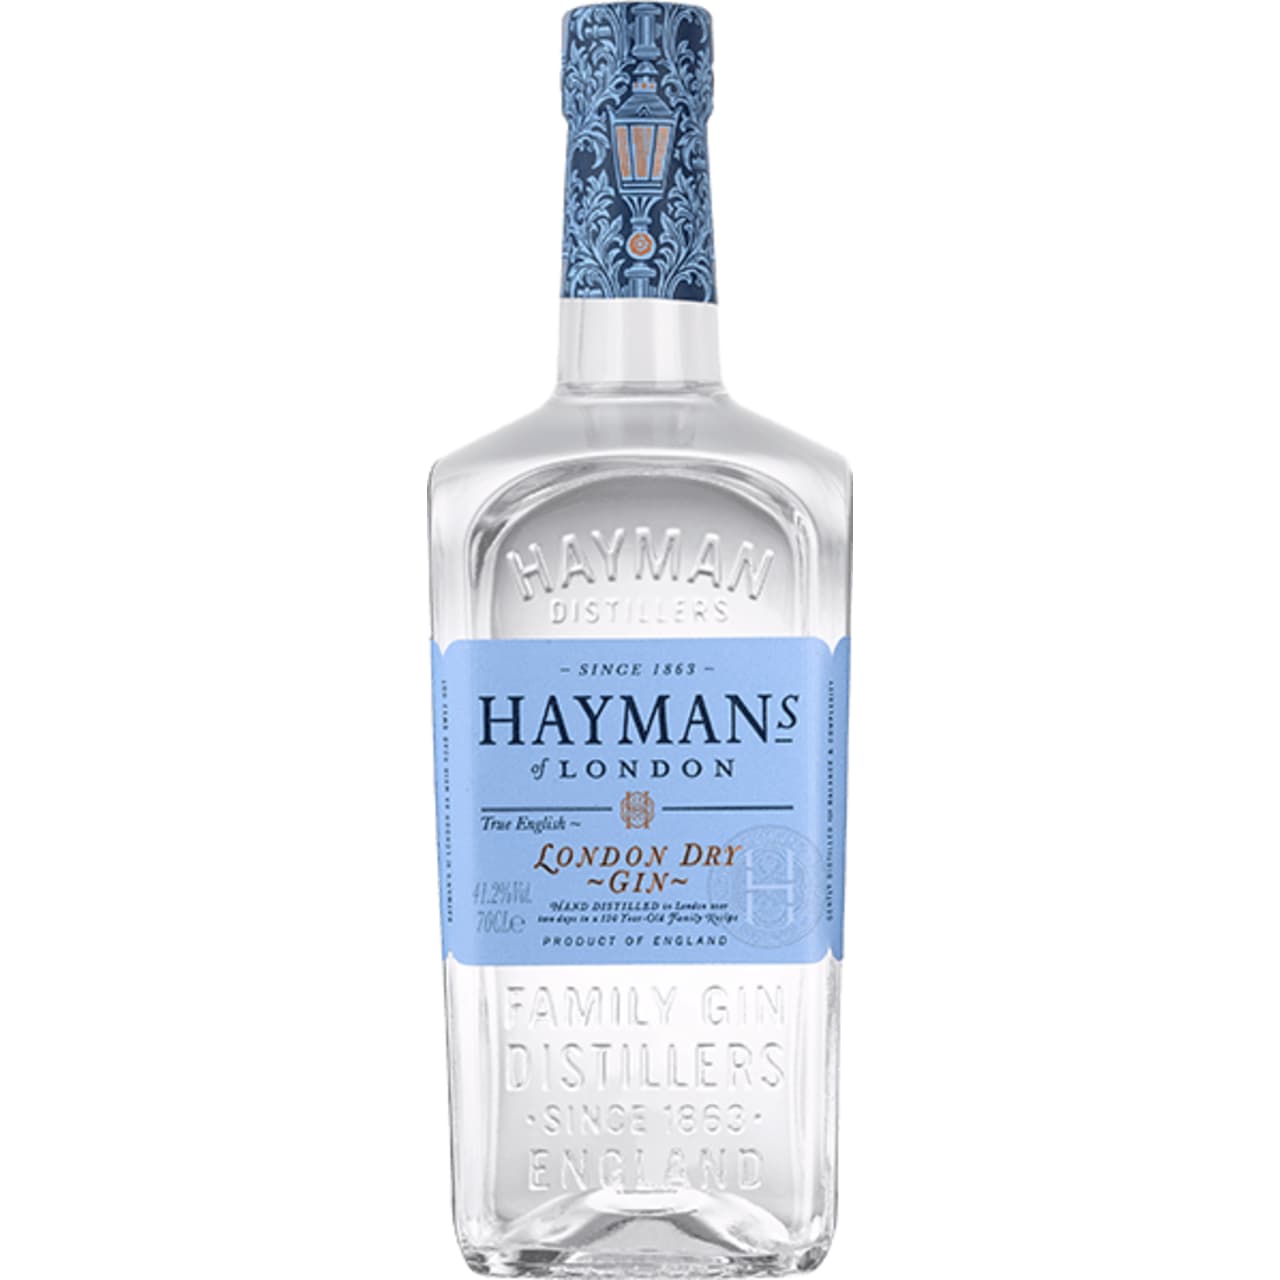 With fresh citrus, bright juniper and floral notes, Haymans London Dry Gin really hits home with flavour. Hints of pepper, together with a crisp blend of citrus flavours and liquorice notes, create a highly versatile and elegantly flavoured gin.